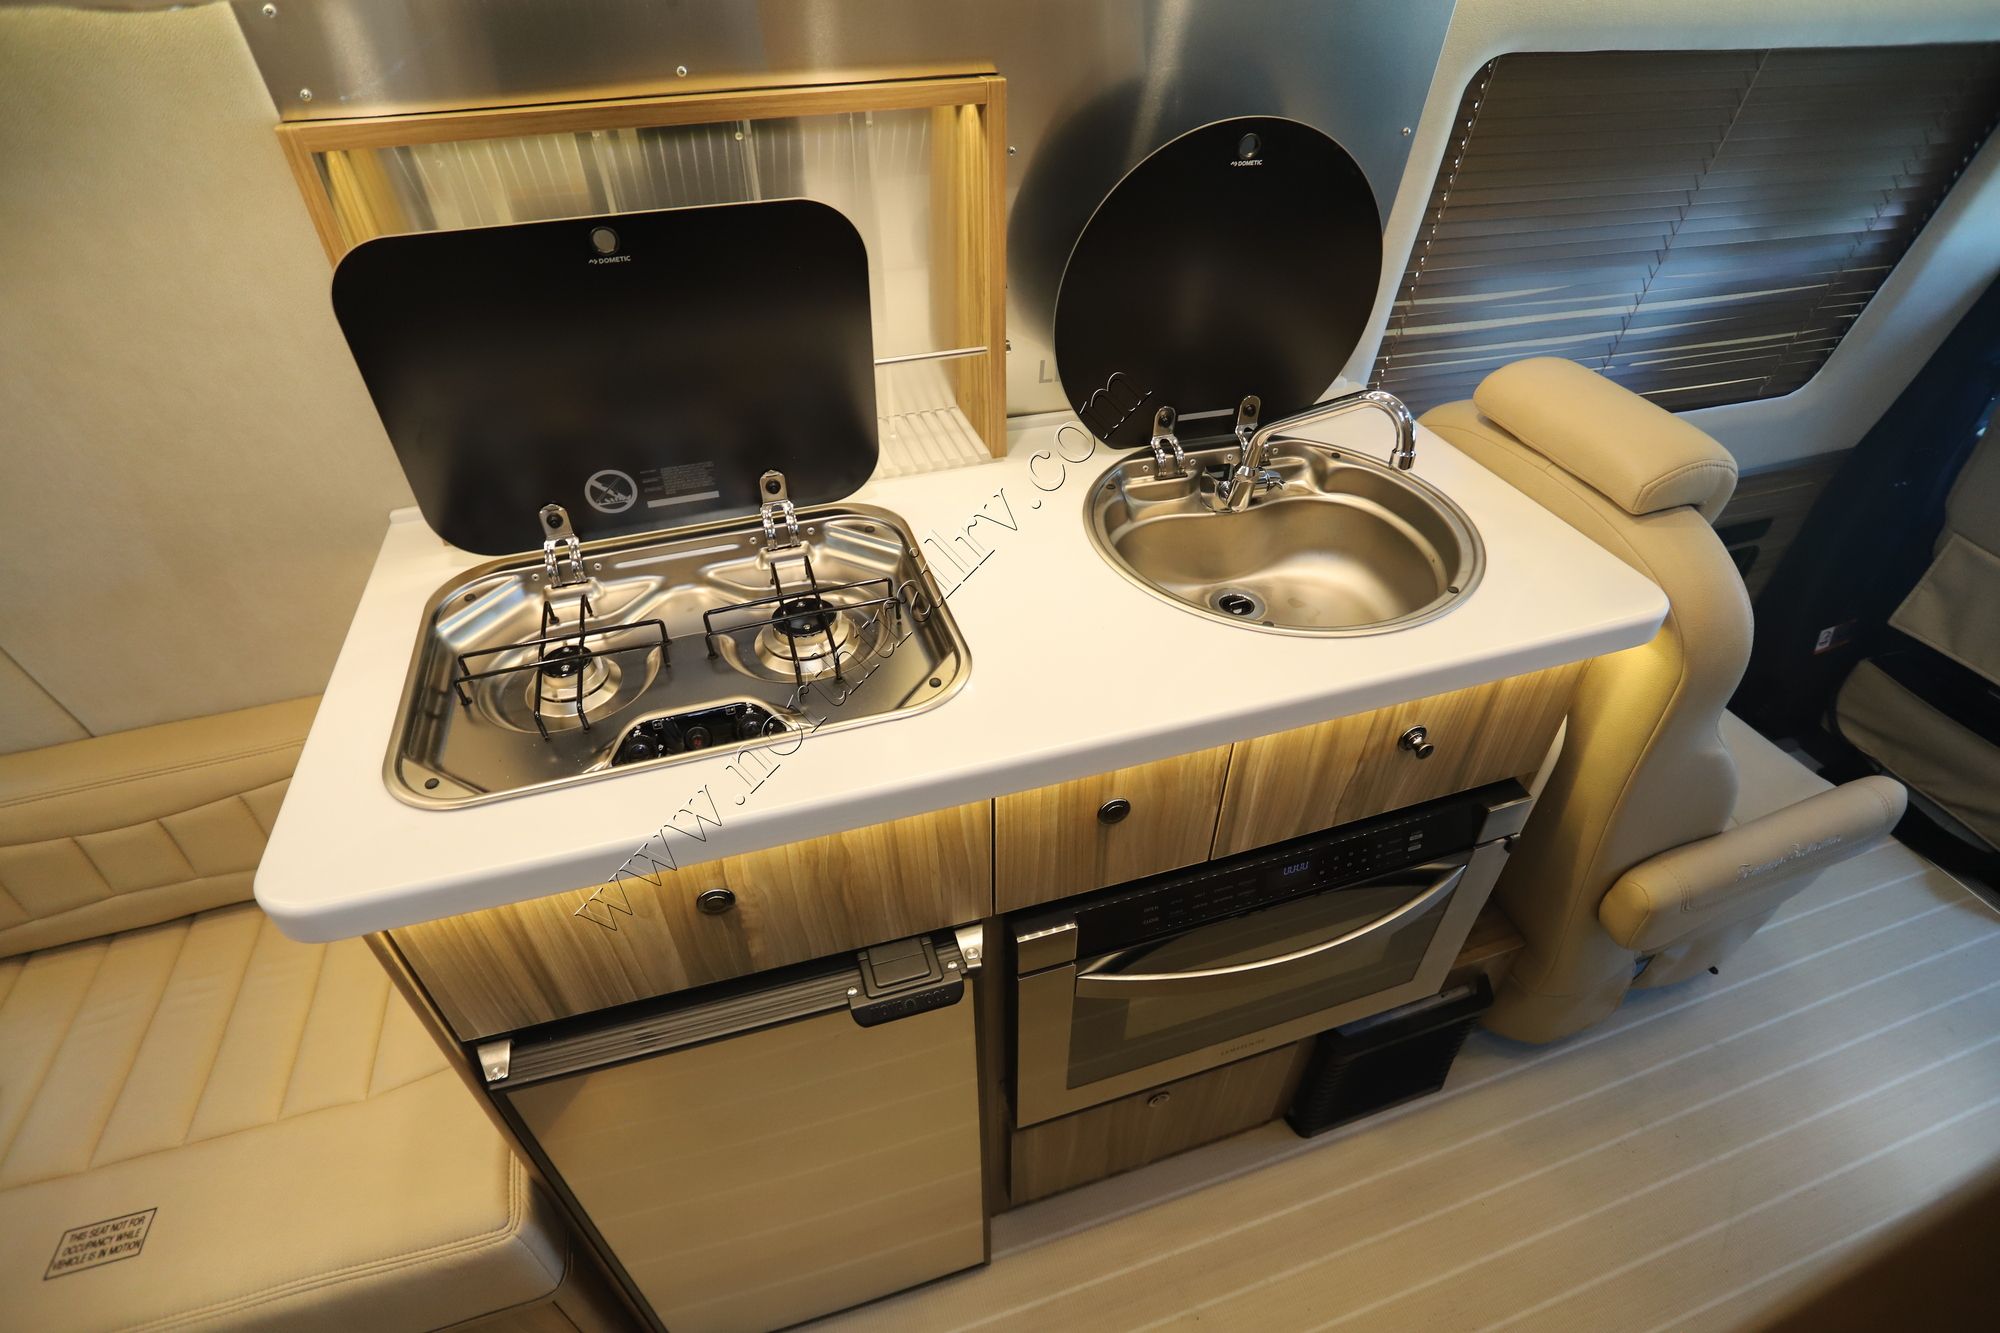 Used 2020 Airstream Interstate LOUNGE 4X4 TB Class B  For Sale